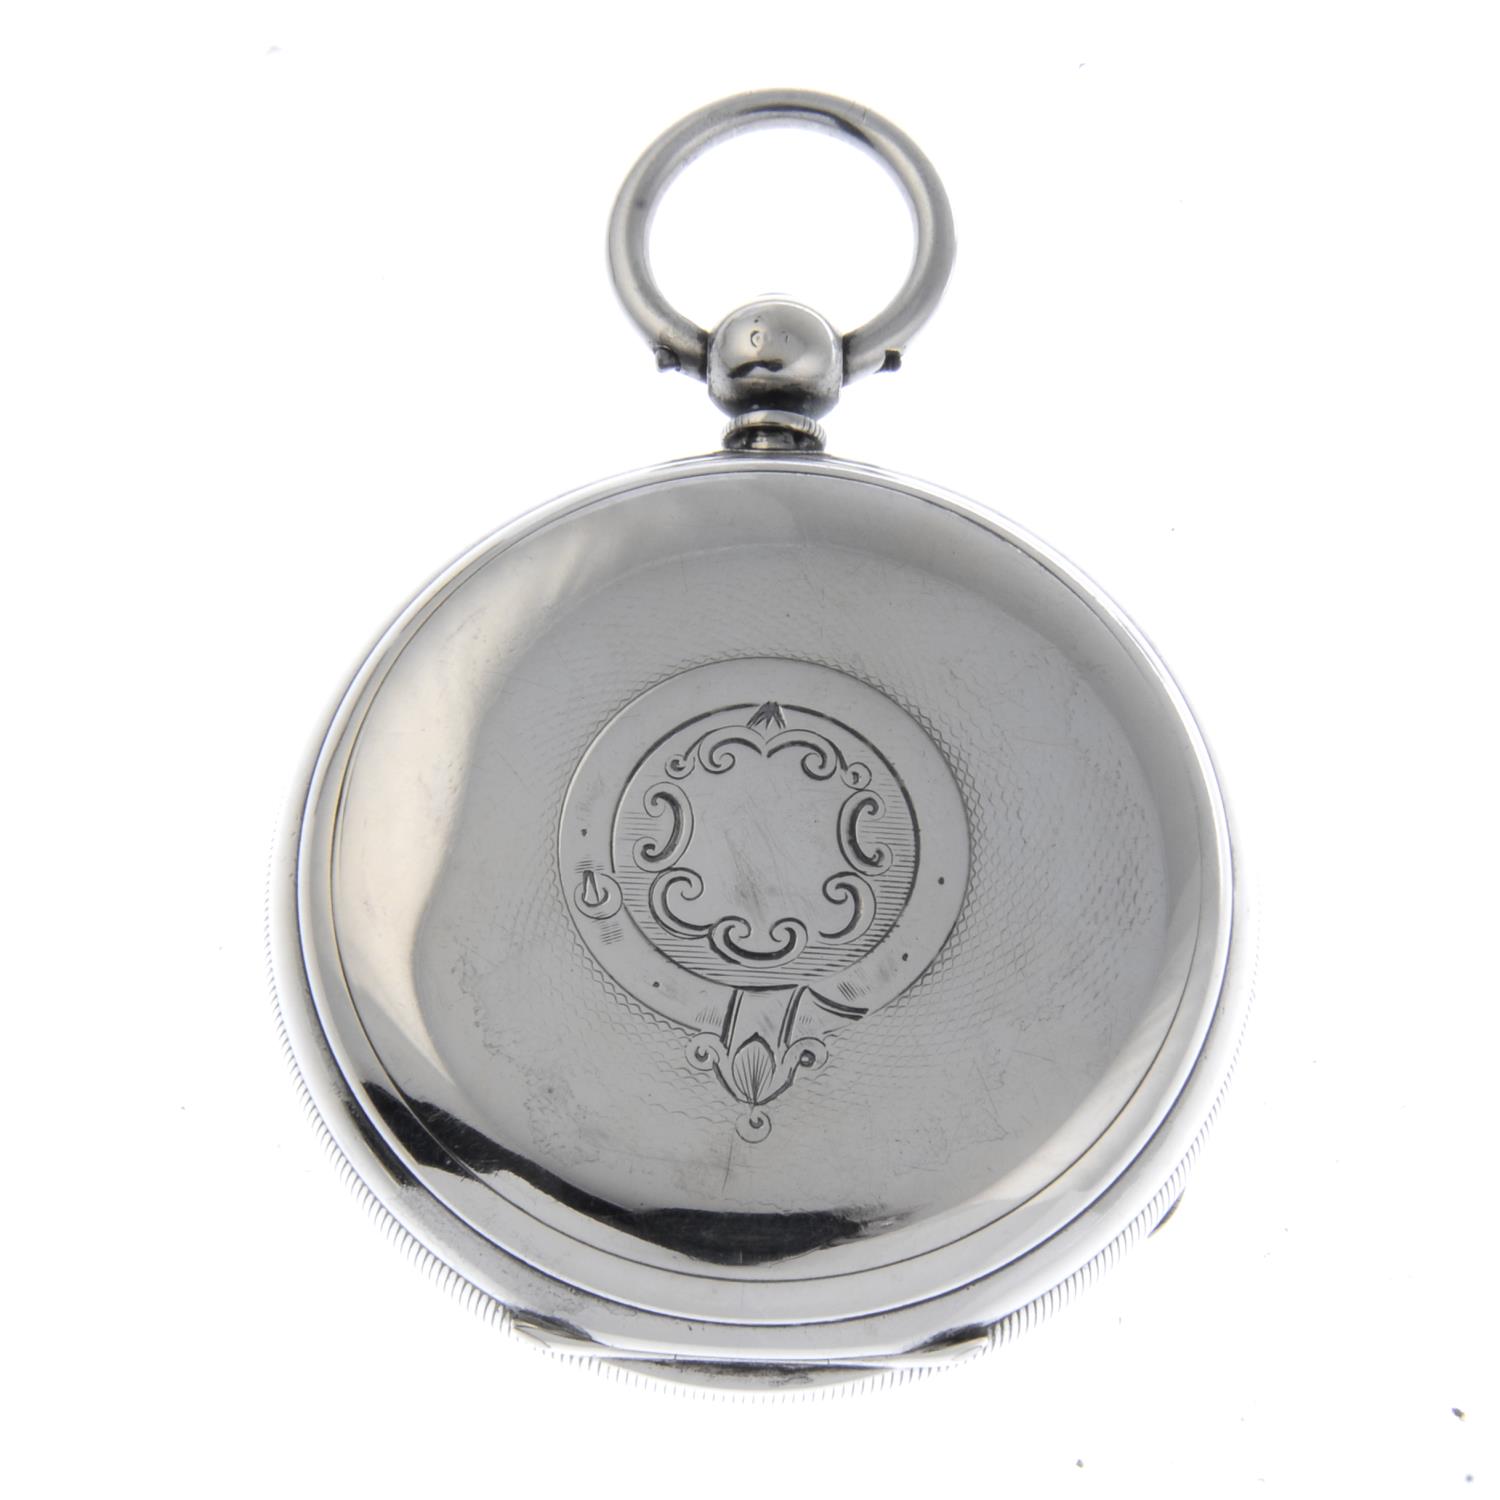 An open face pocket watch by E Wise. - Image 2 of 4